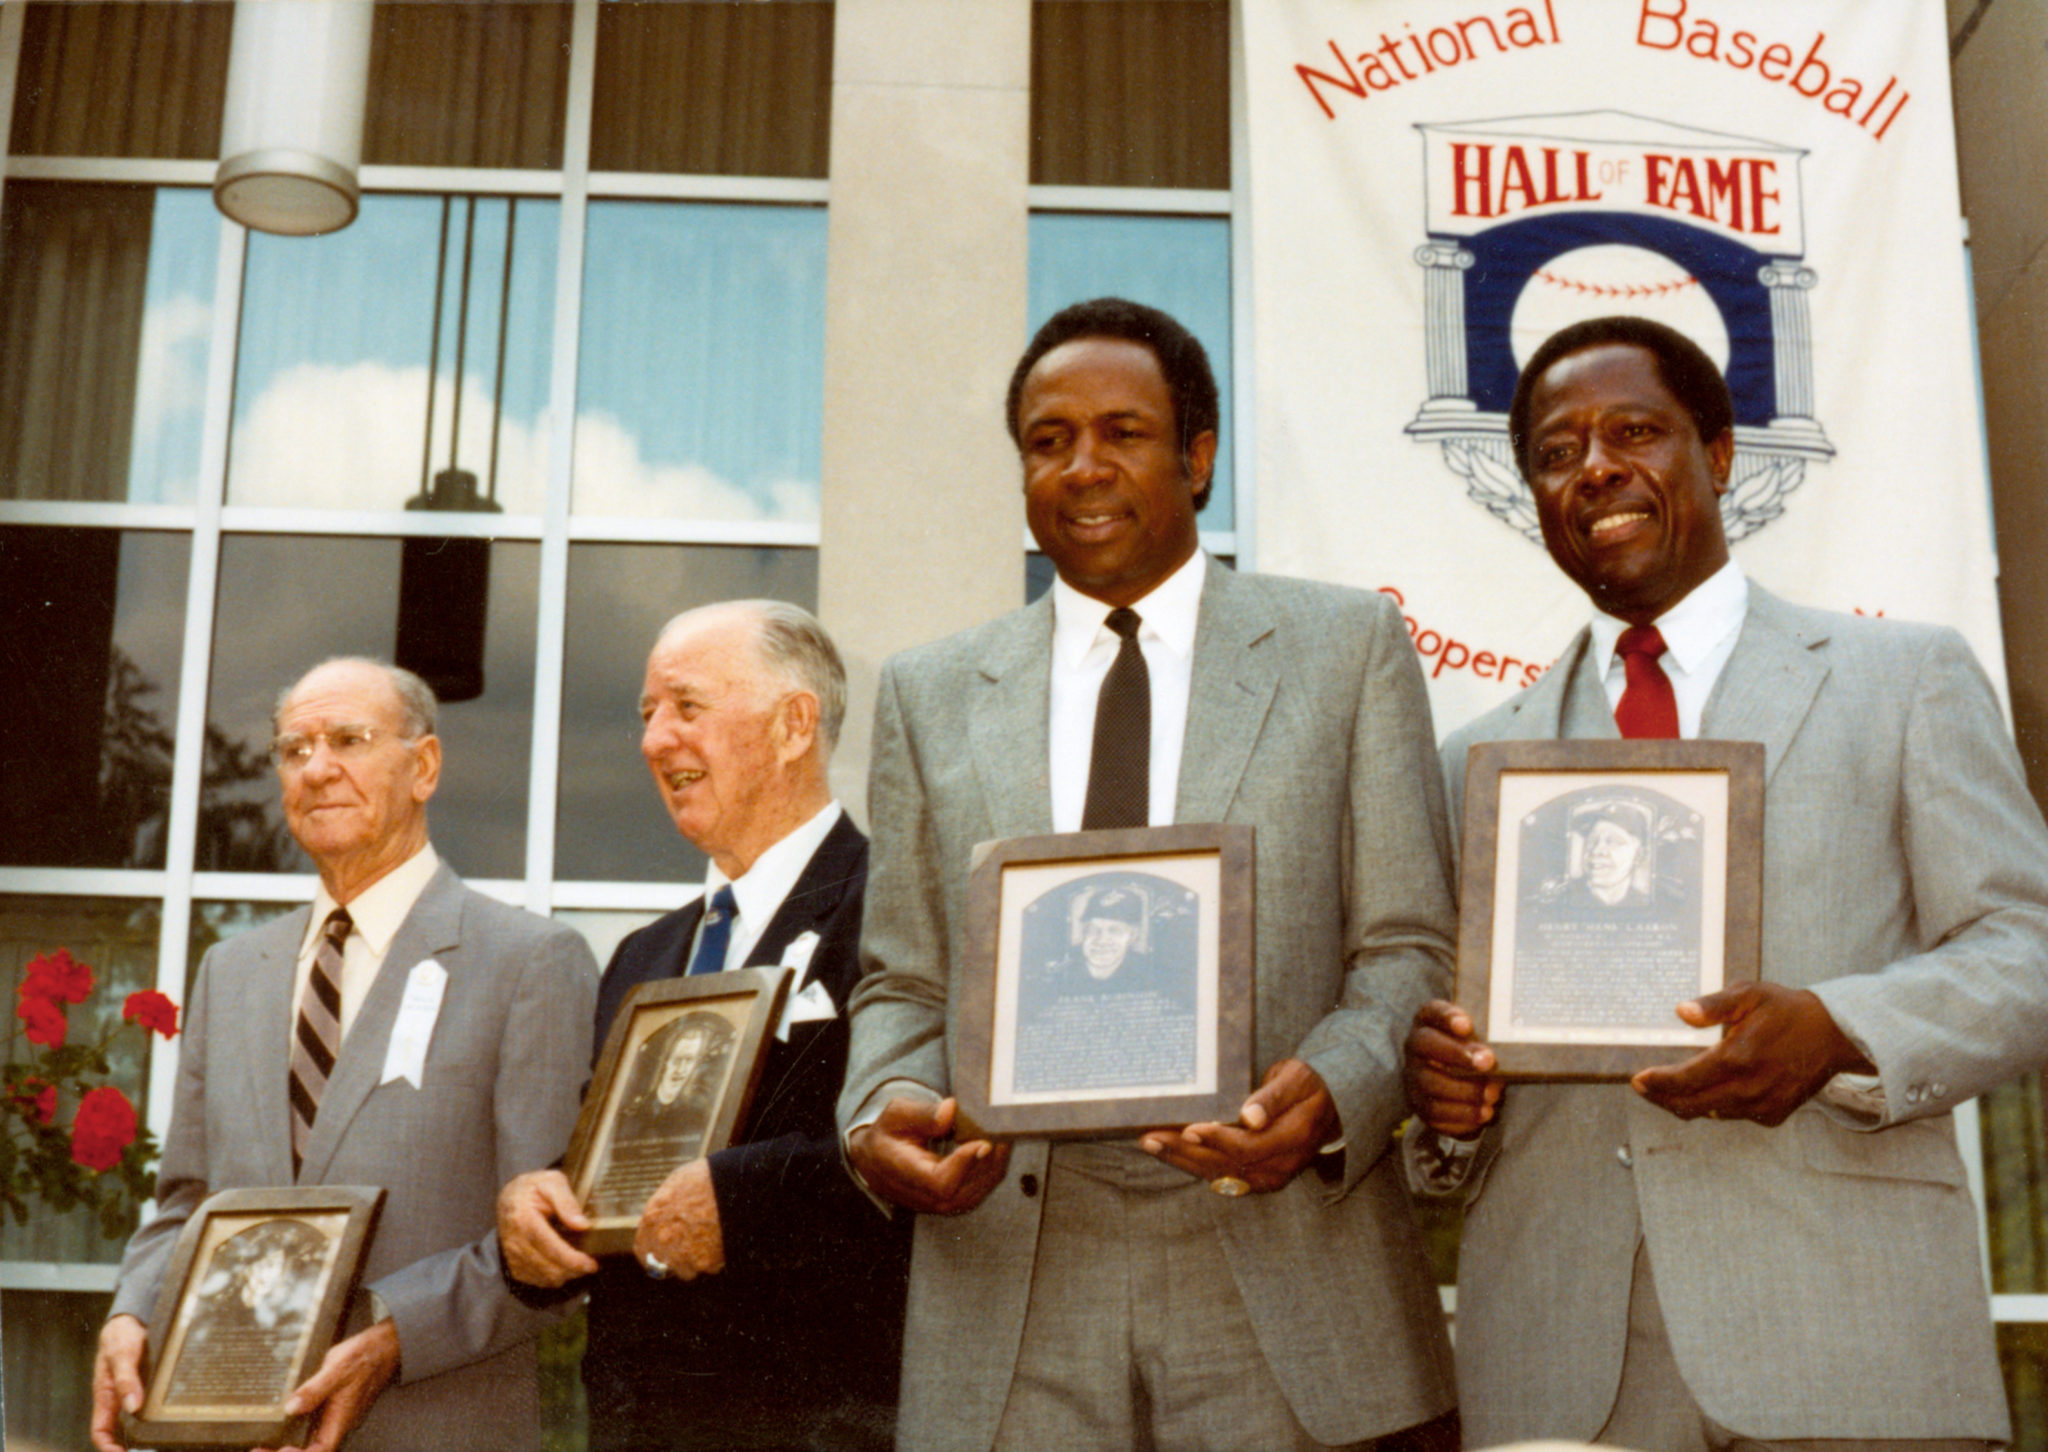 Hank Aaron is Inducted into the Hall of Fame